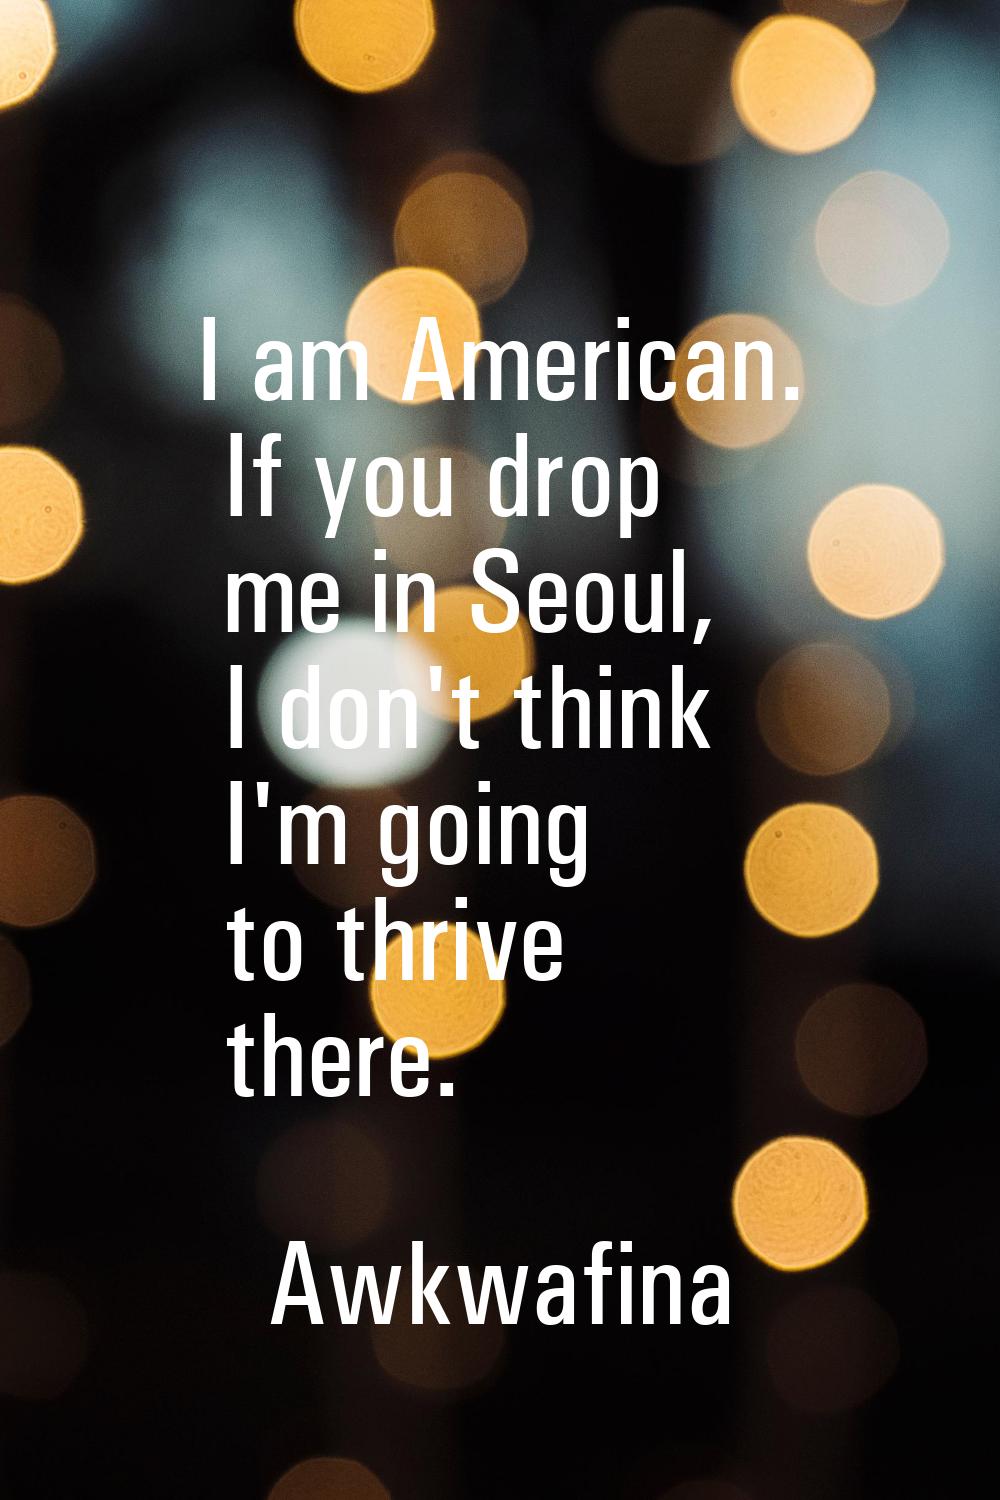 I am American. If you drop me in Seoul, I don't think I'm going to thrive there.